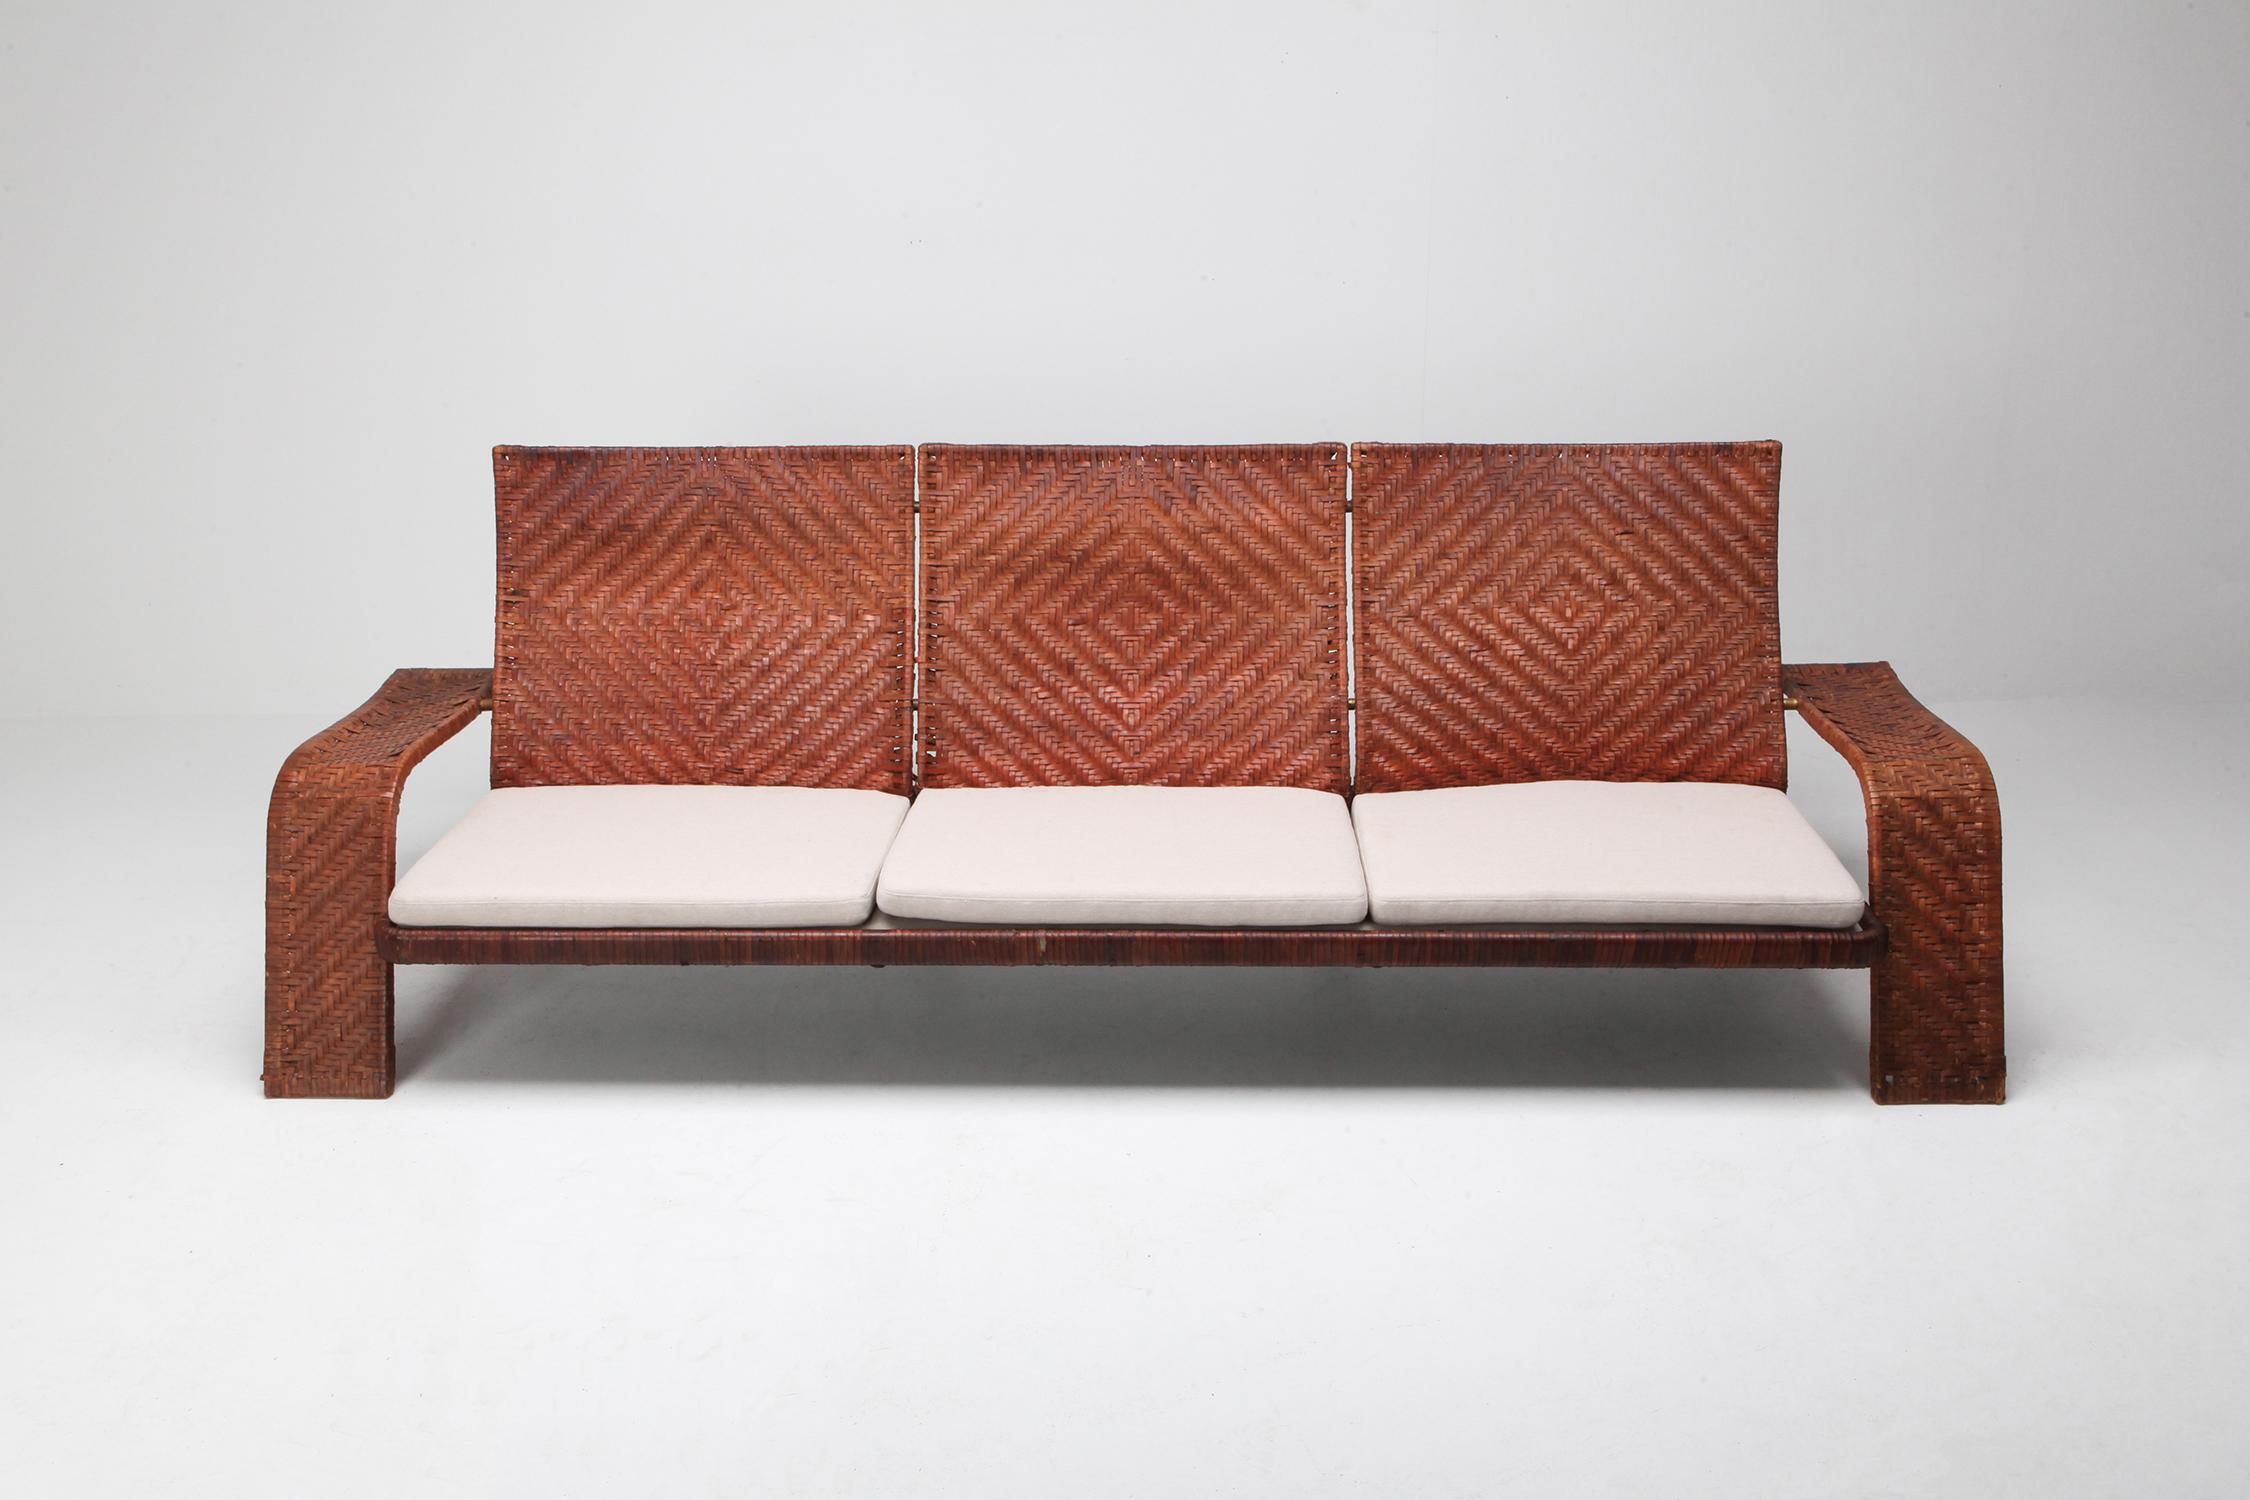 Post-modern three-seat couch by Marzio Cecchi for Studio Most.

Woven leather frame in diamond patterns finished with brass details.
finished with newly upholstered linnen cushions.
High end and custom made piece with amazing patina.
This couch